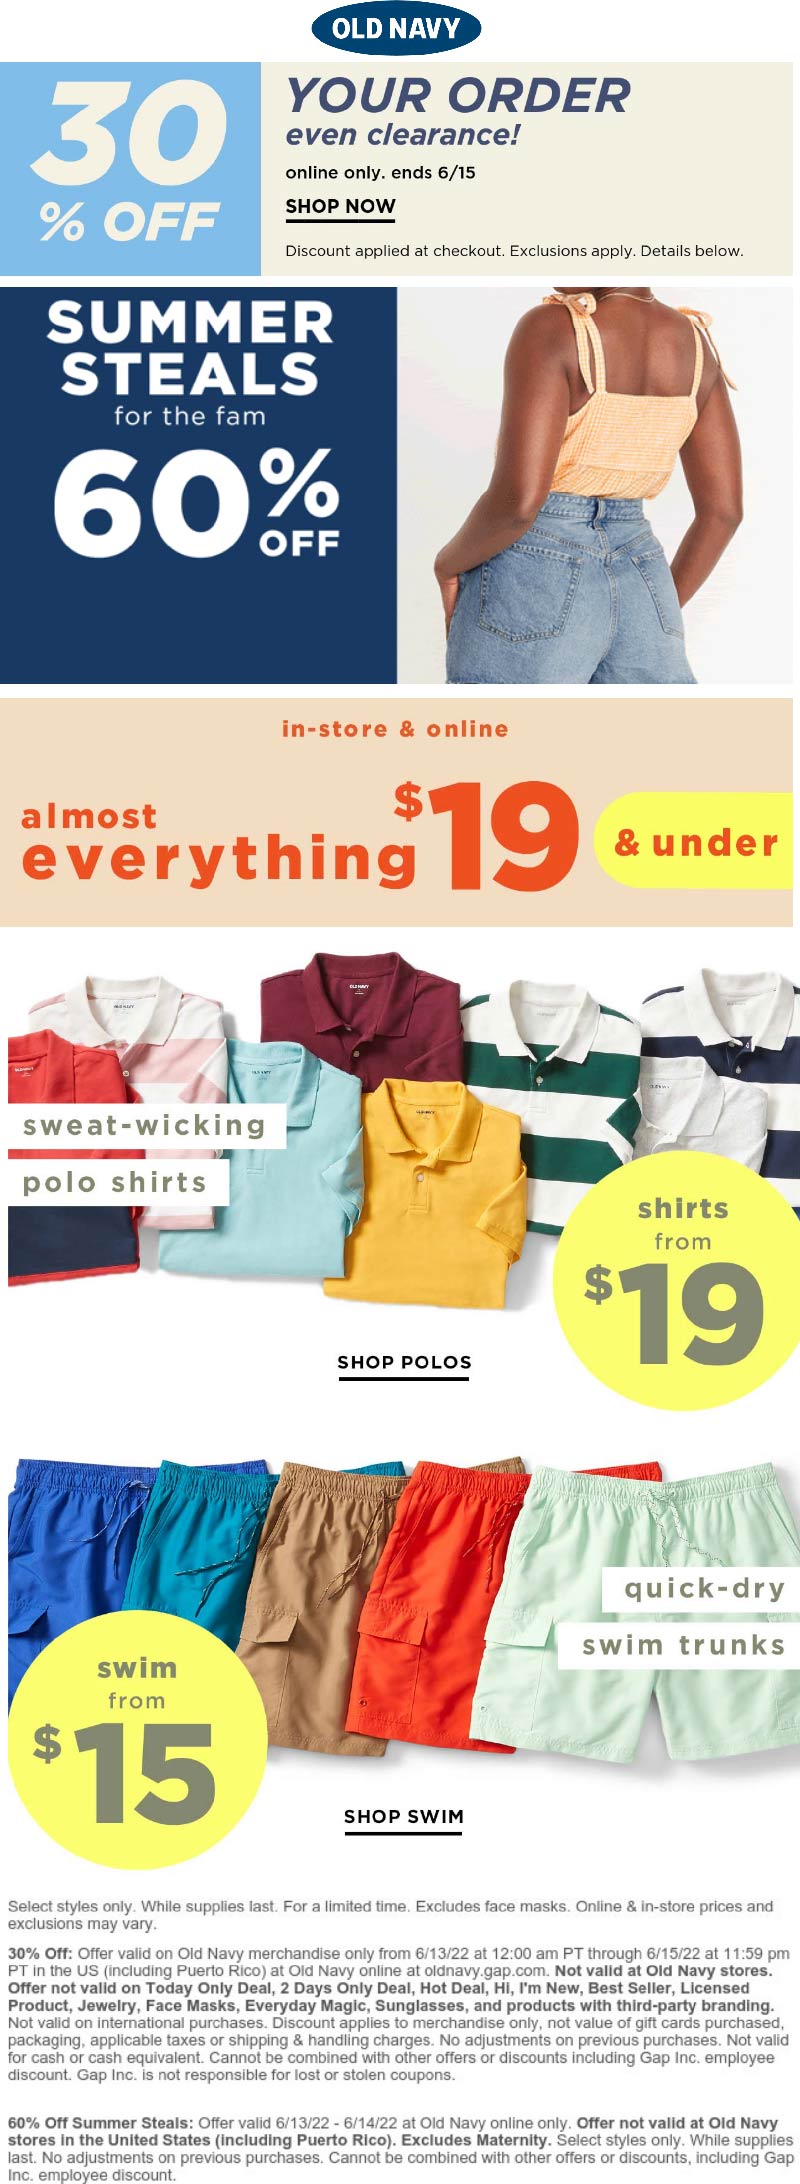 Old Navy stores Coupon  Everything under $20 at Old Navy, additional 30% off online #oldnavy 